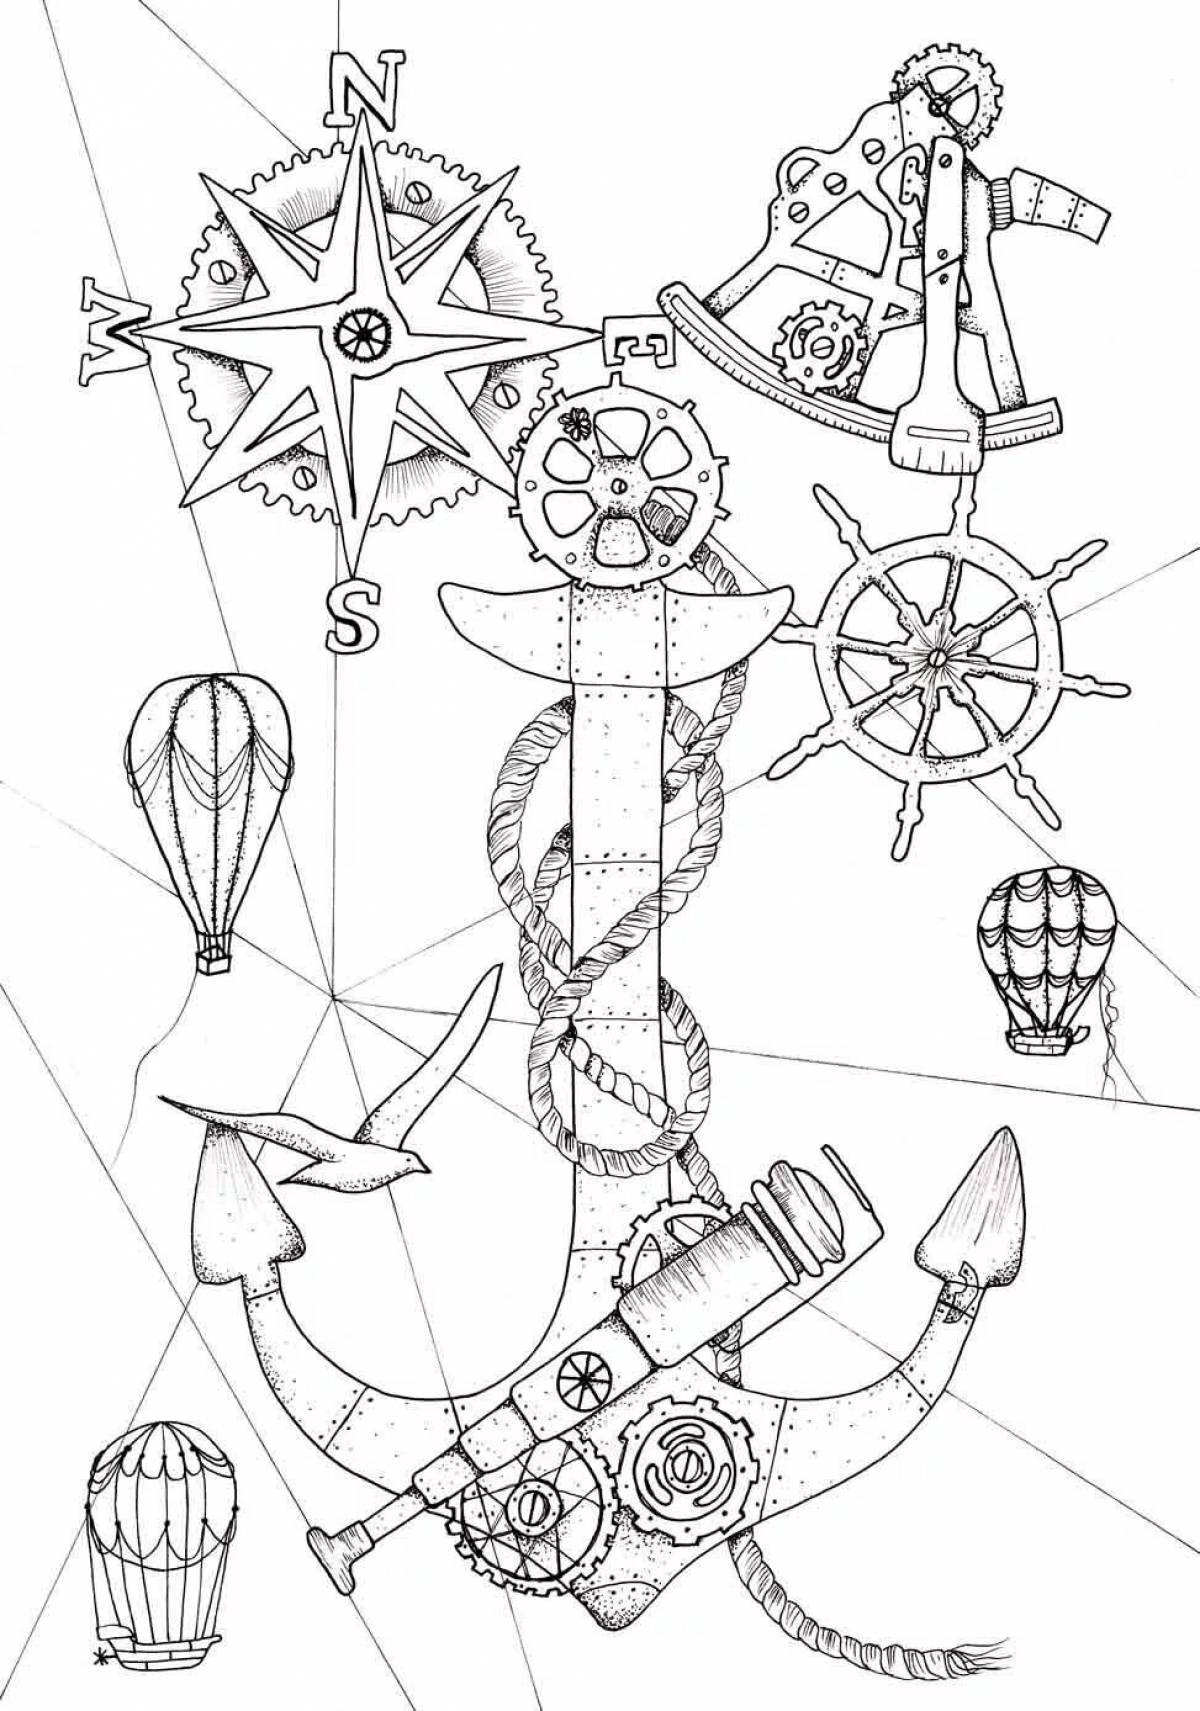 Steampunk themed coloring book